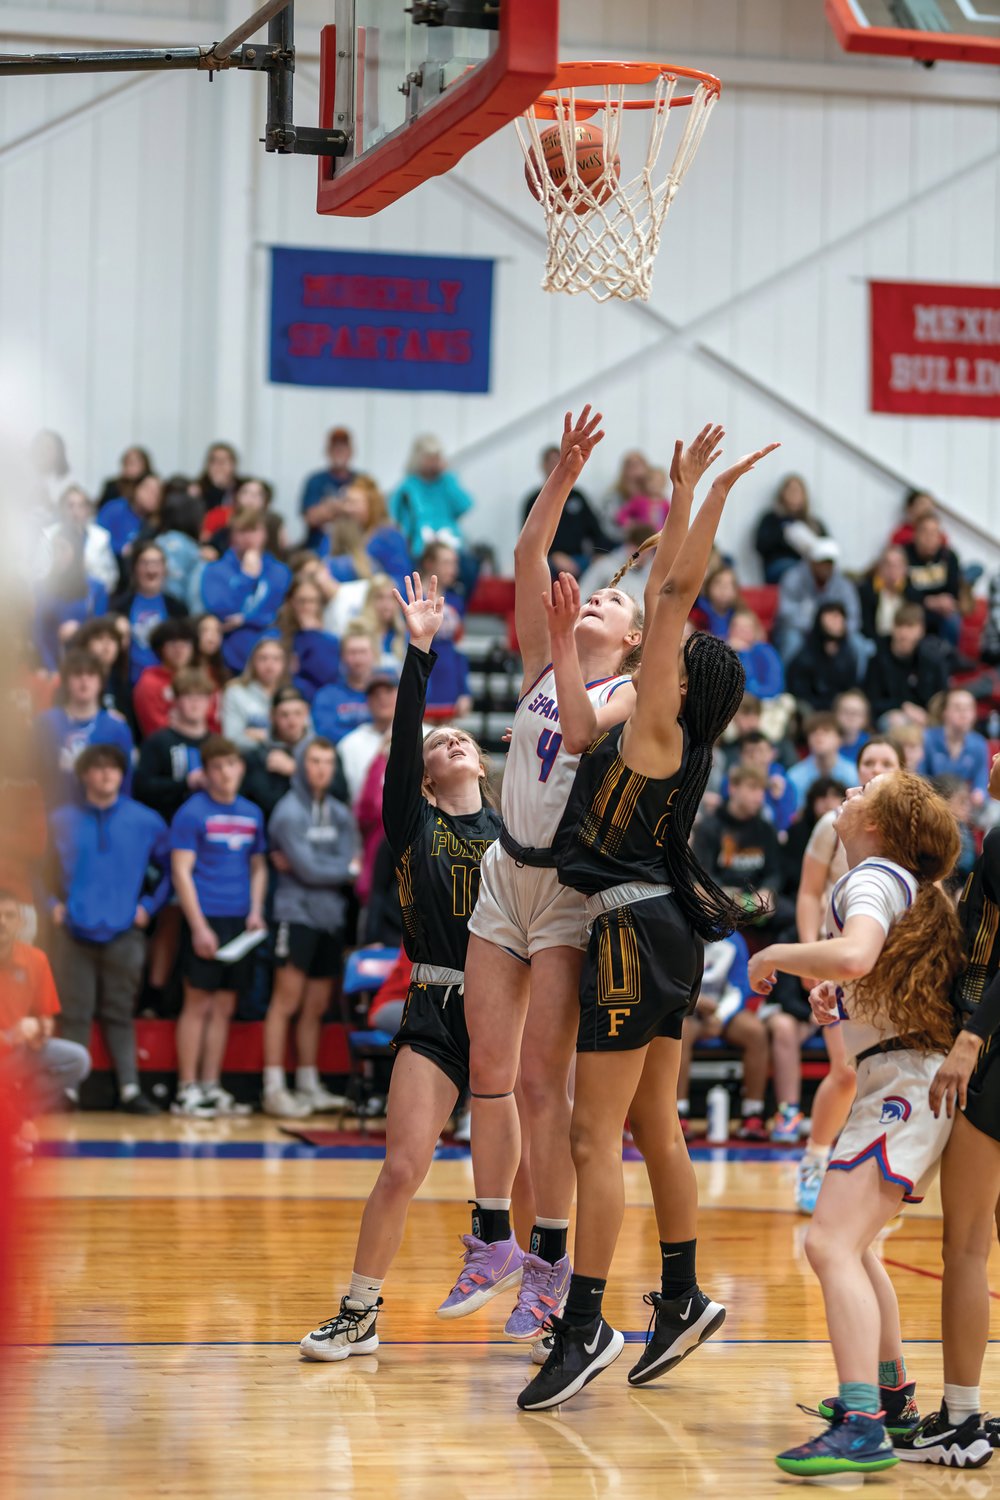 Moberly sophomore Asa Fanning scores two of her 10 points in Tuesday’s 67-34 victory at home over Fulton. The win give the Lady Spartans a share of the NCMC title. (John Wright Photography)